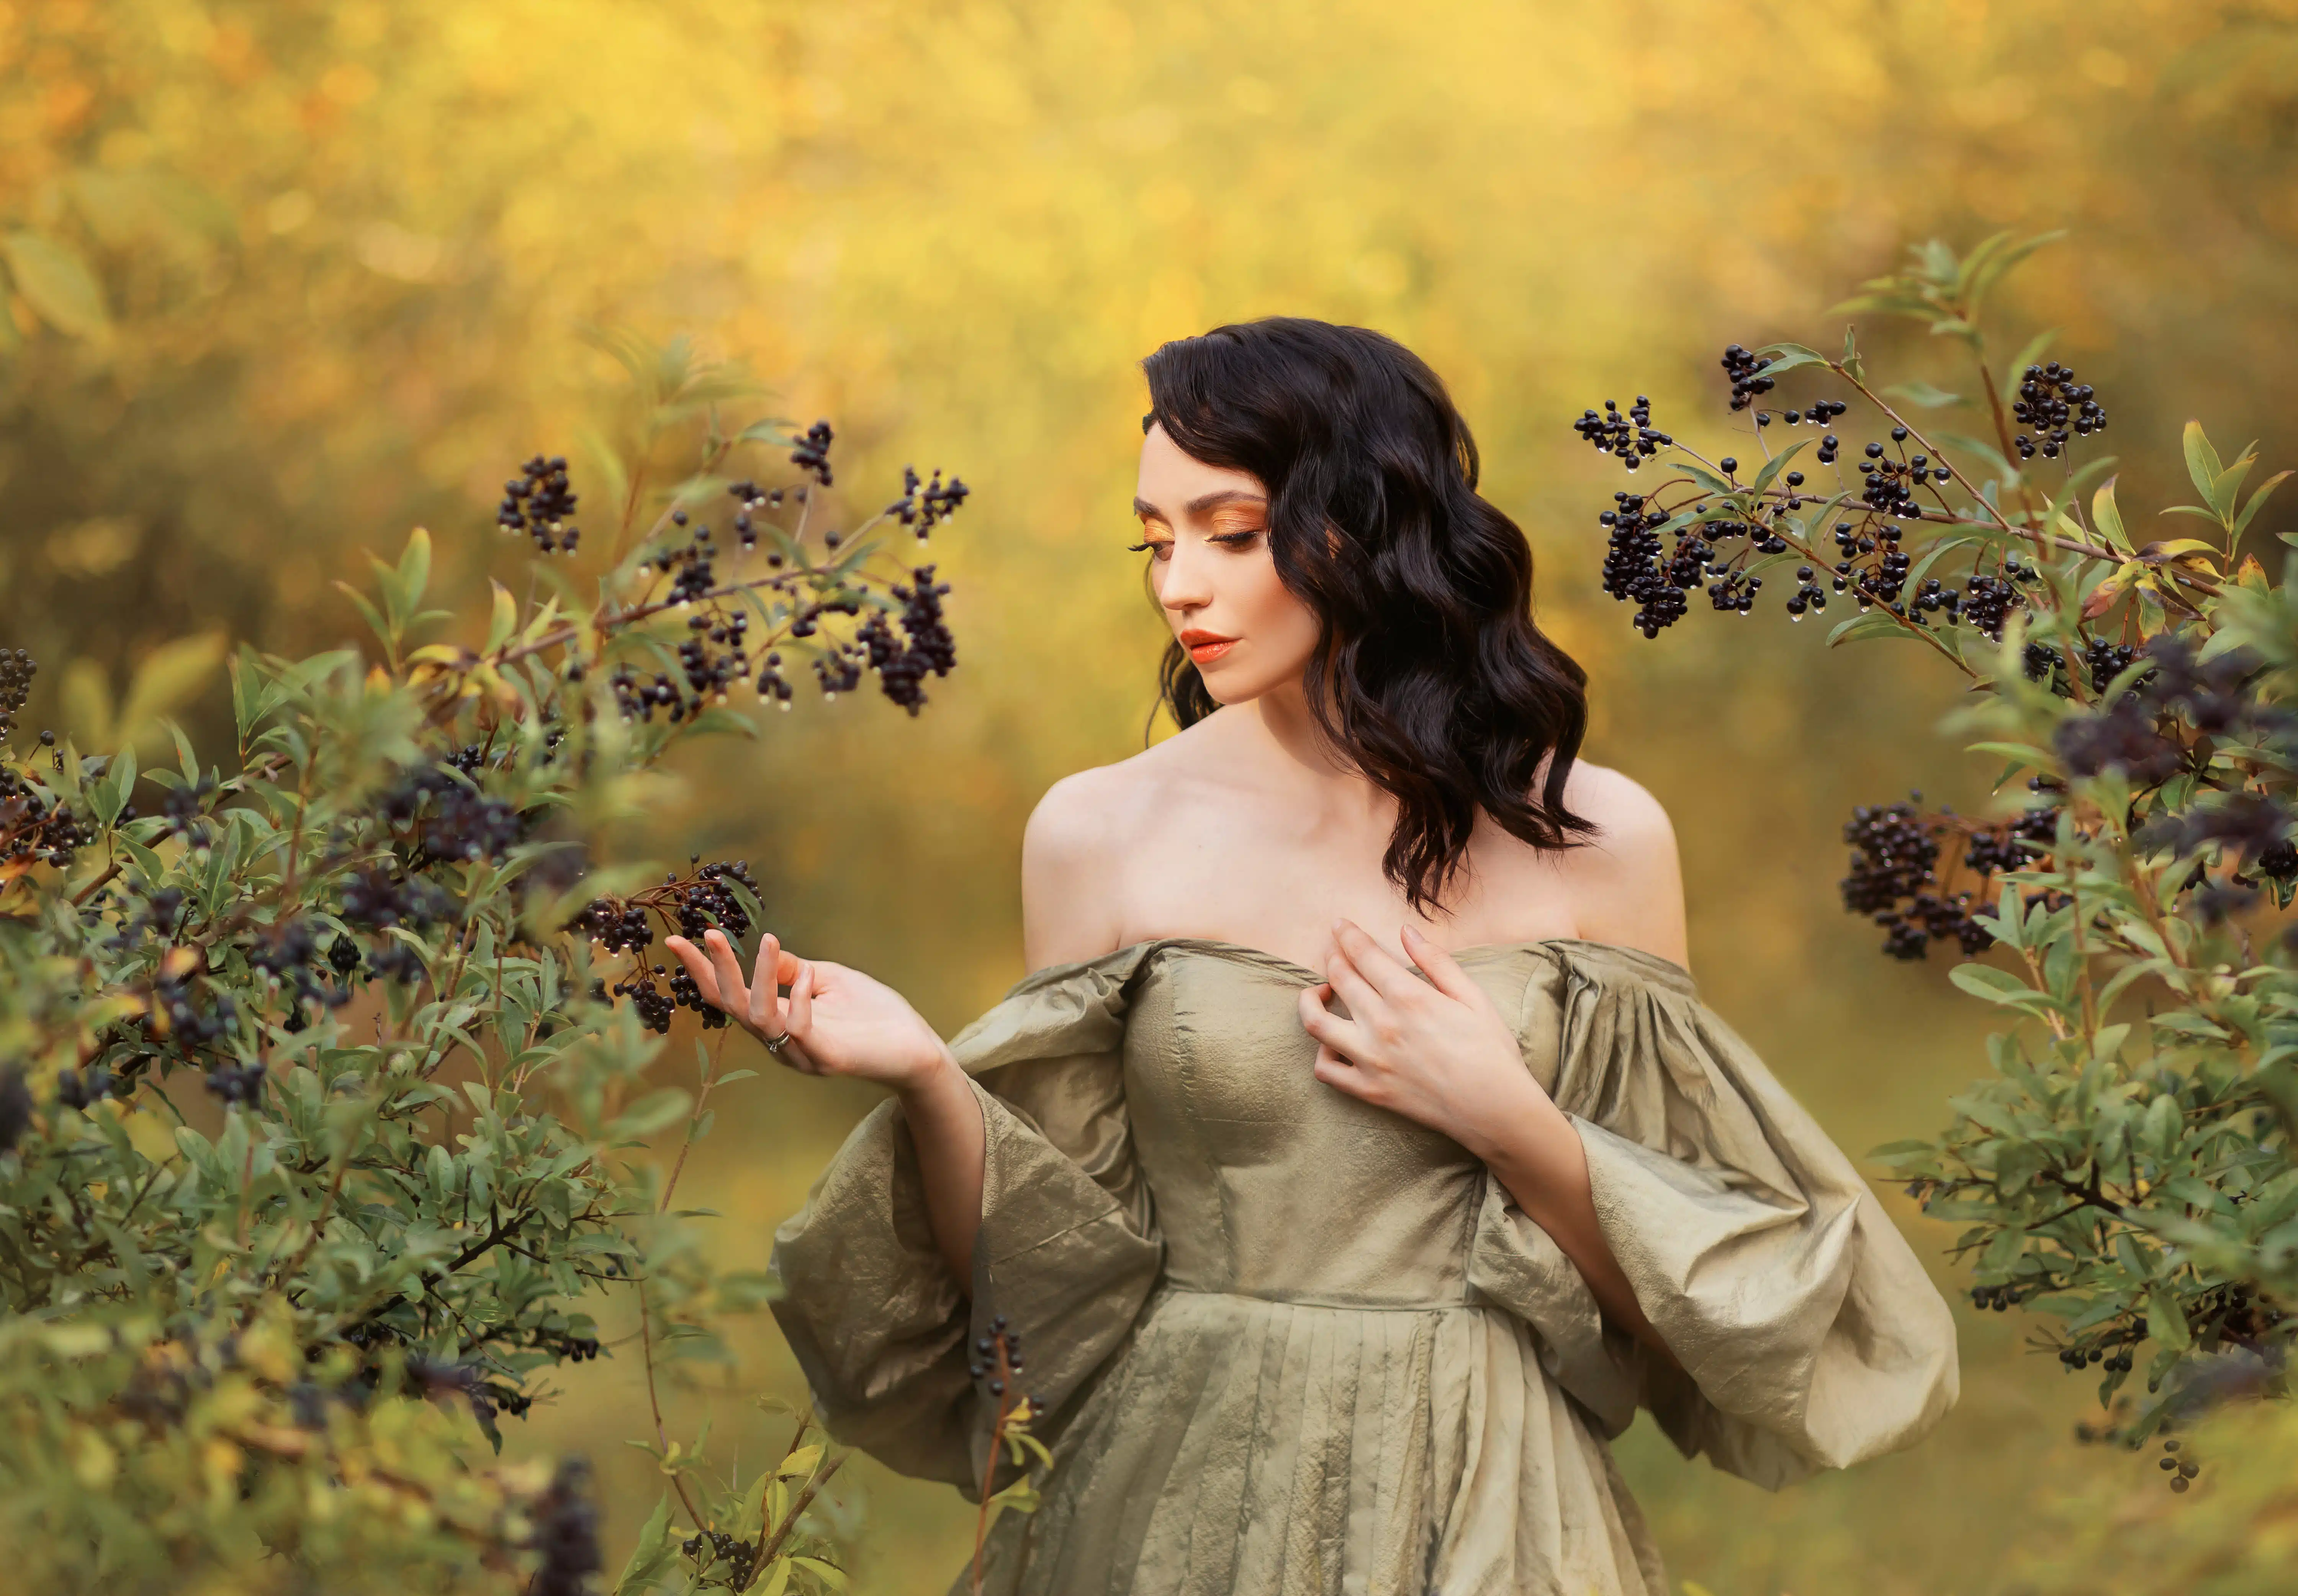 Romantic lady fantasy girl princess touches ripe wet black berries. Art photo, portrait of woman queen walking in autumn nature. Medieval dress vintage old style bare sexy off shoulder puffed sleeves.